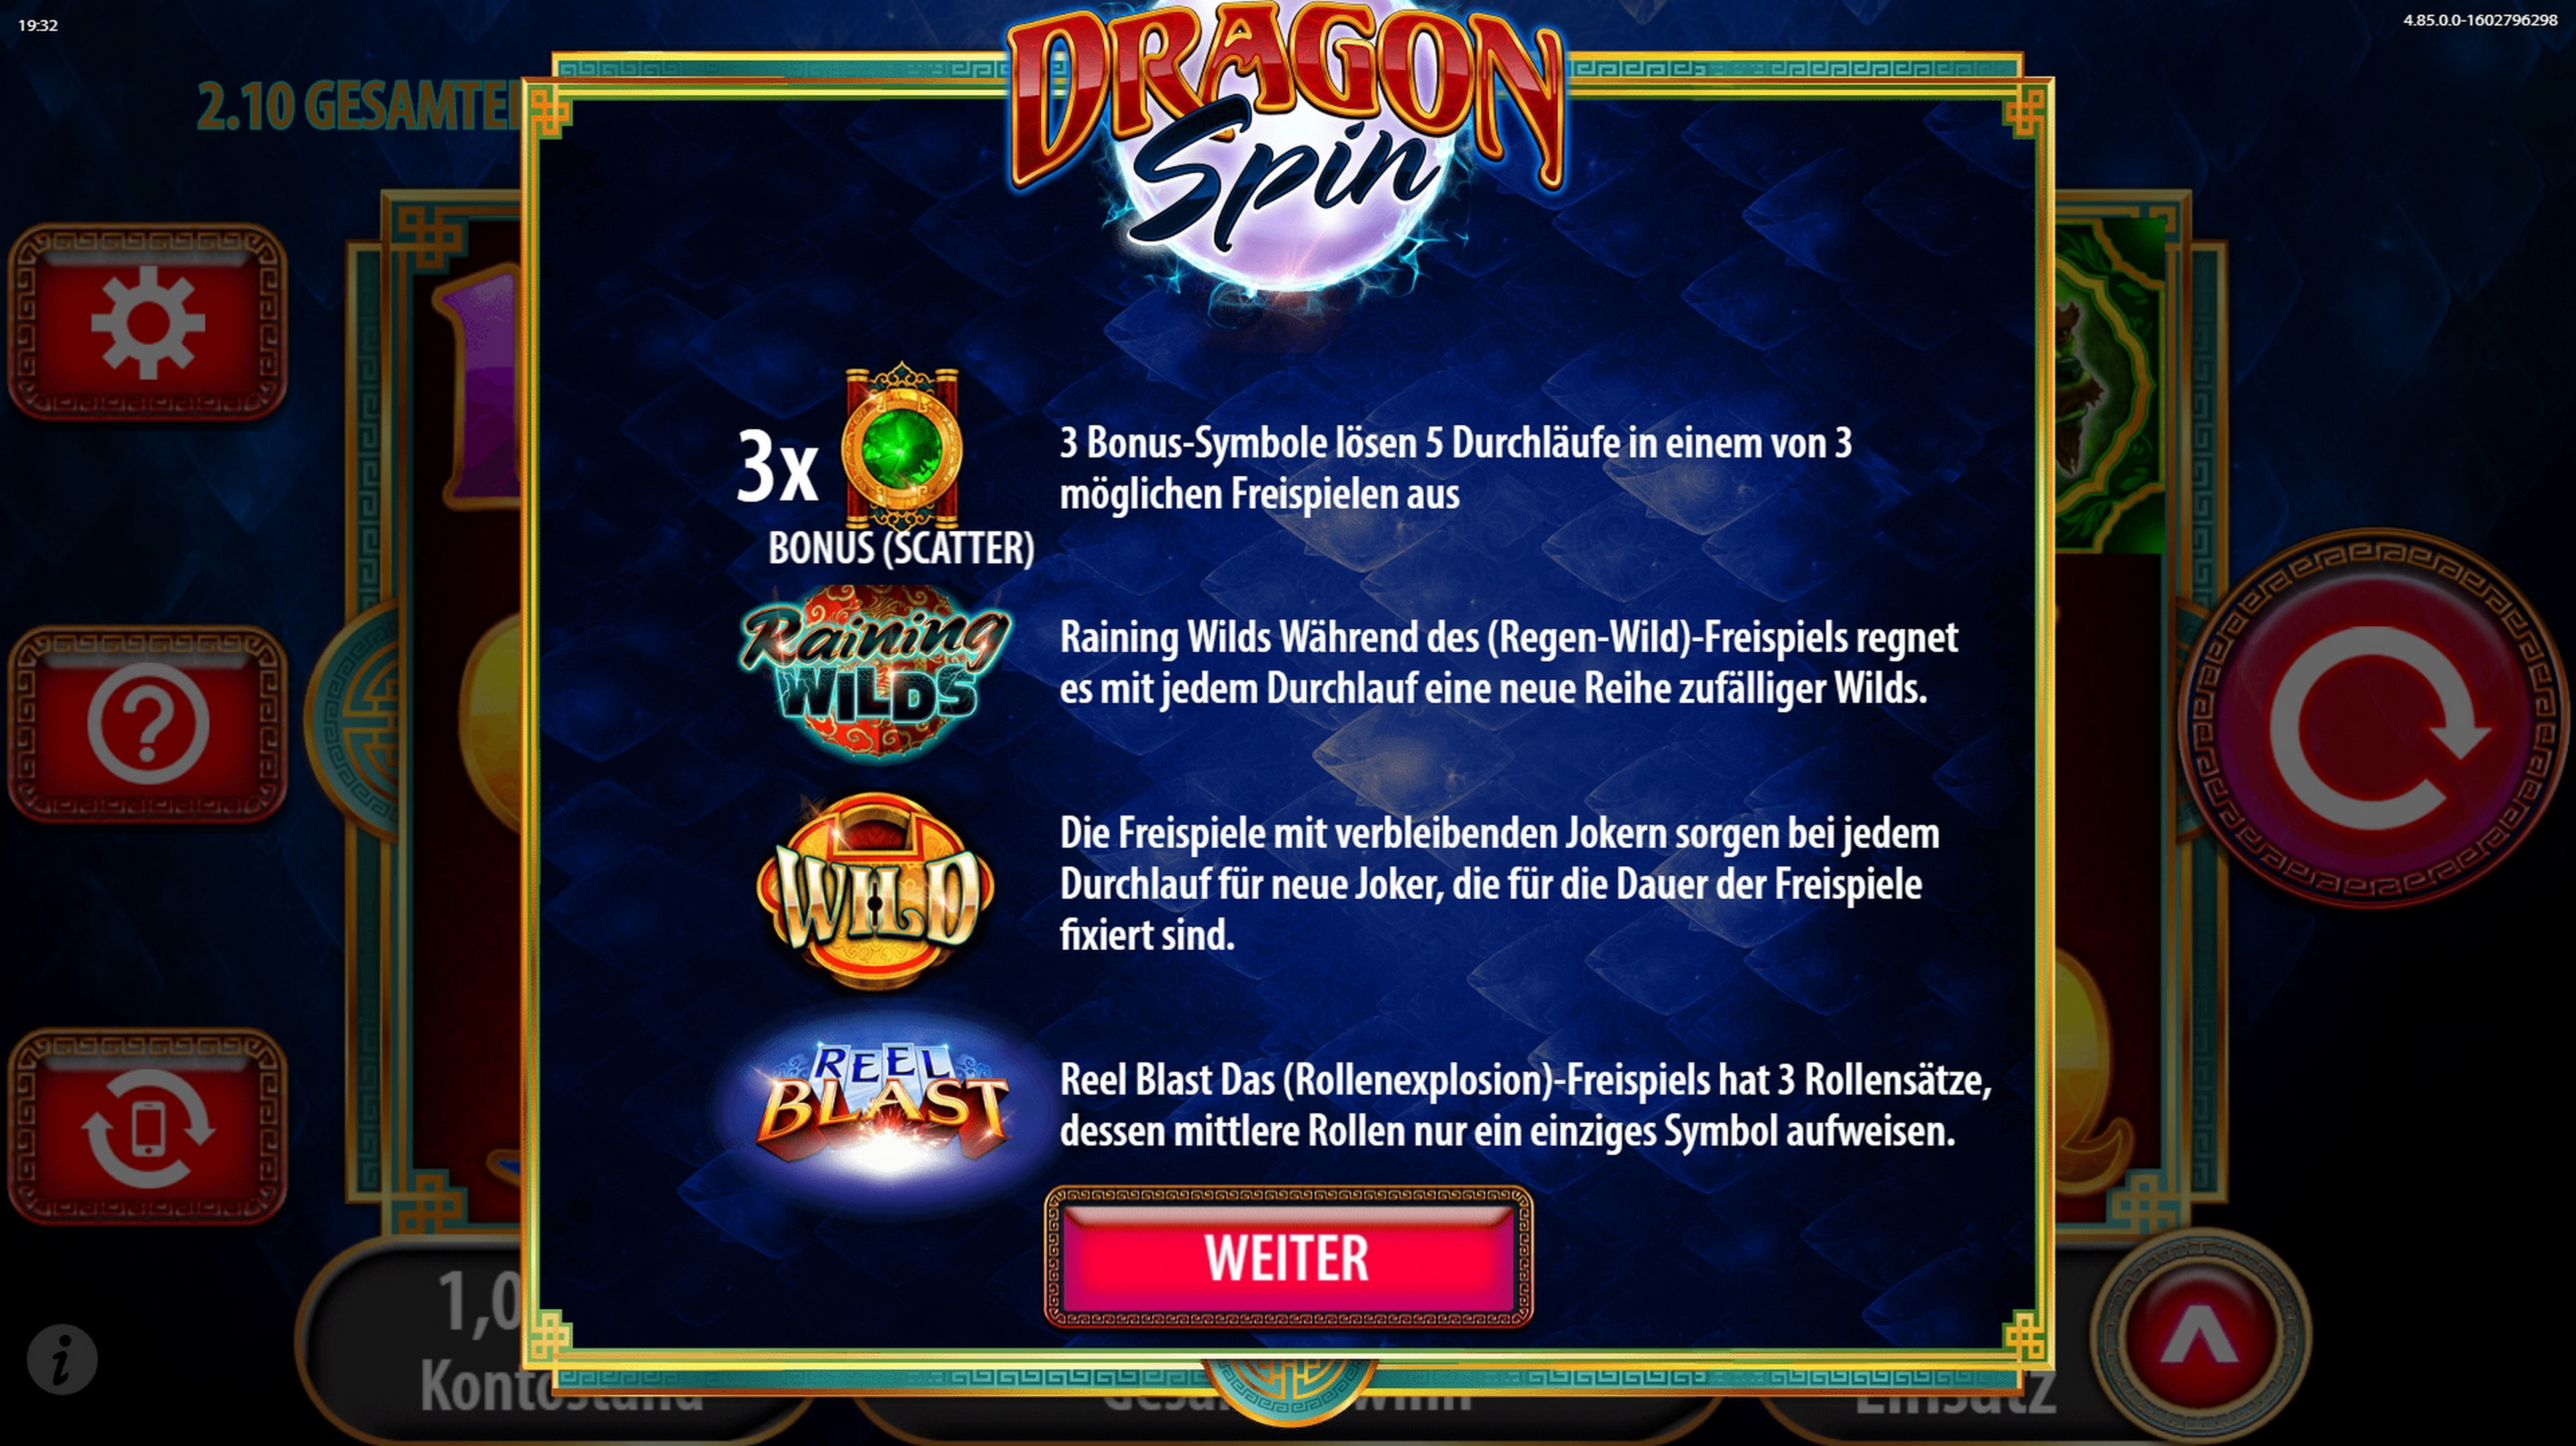 Play Dragon Spin Free Casino Slot Game by Bally Technologies